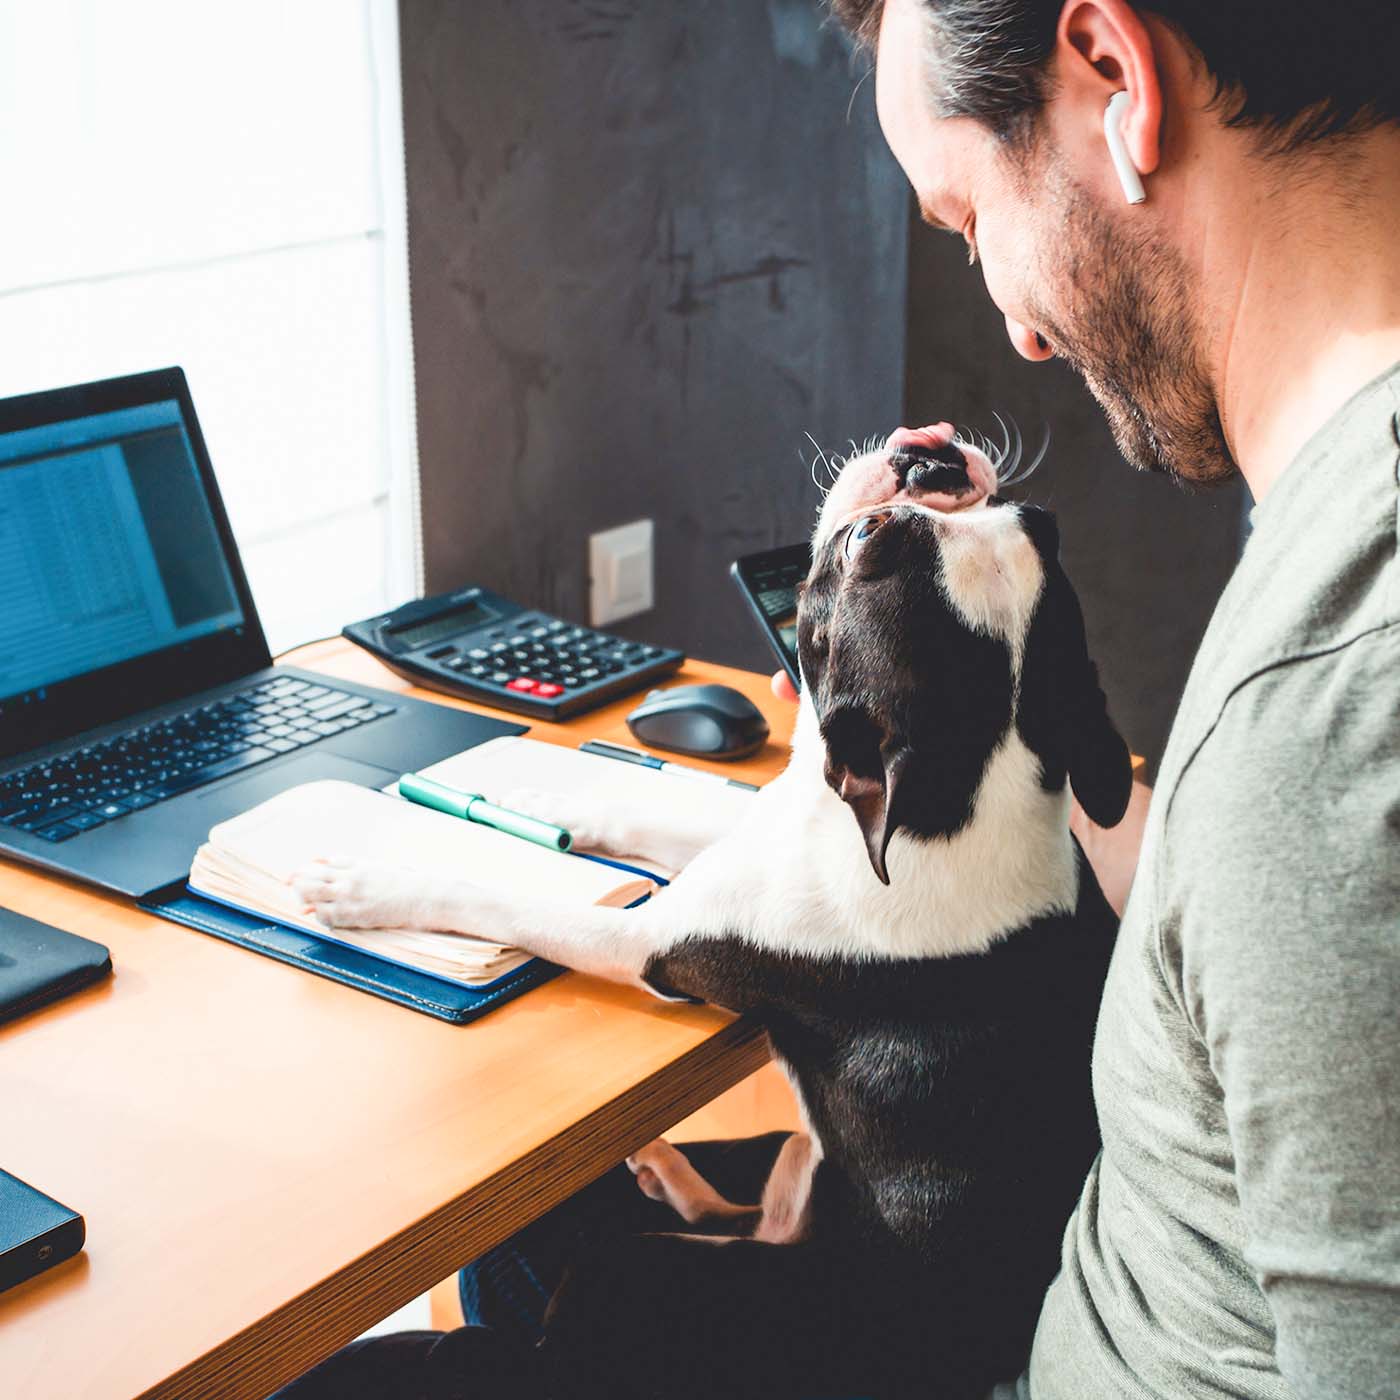 dog playfully interrupting a man's computer work at the desk sitting on his lap